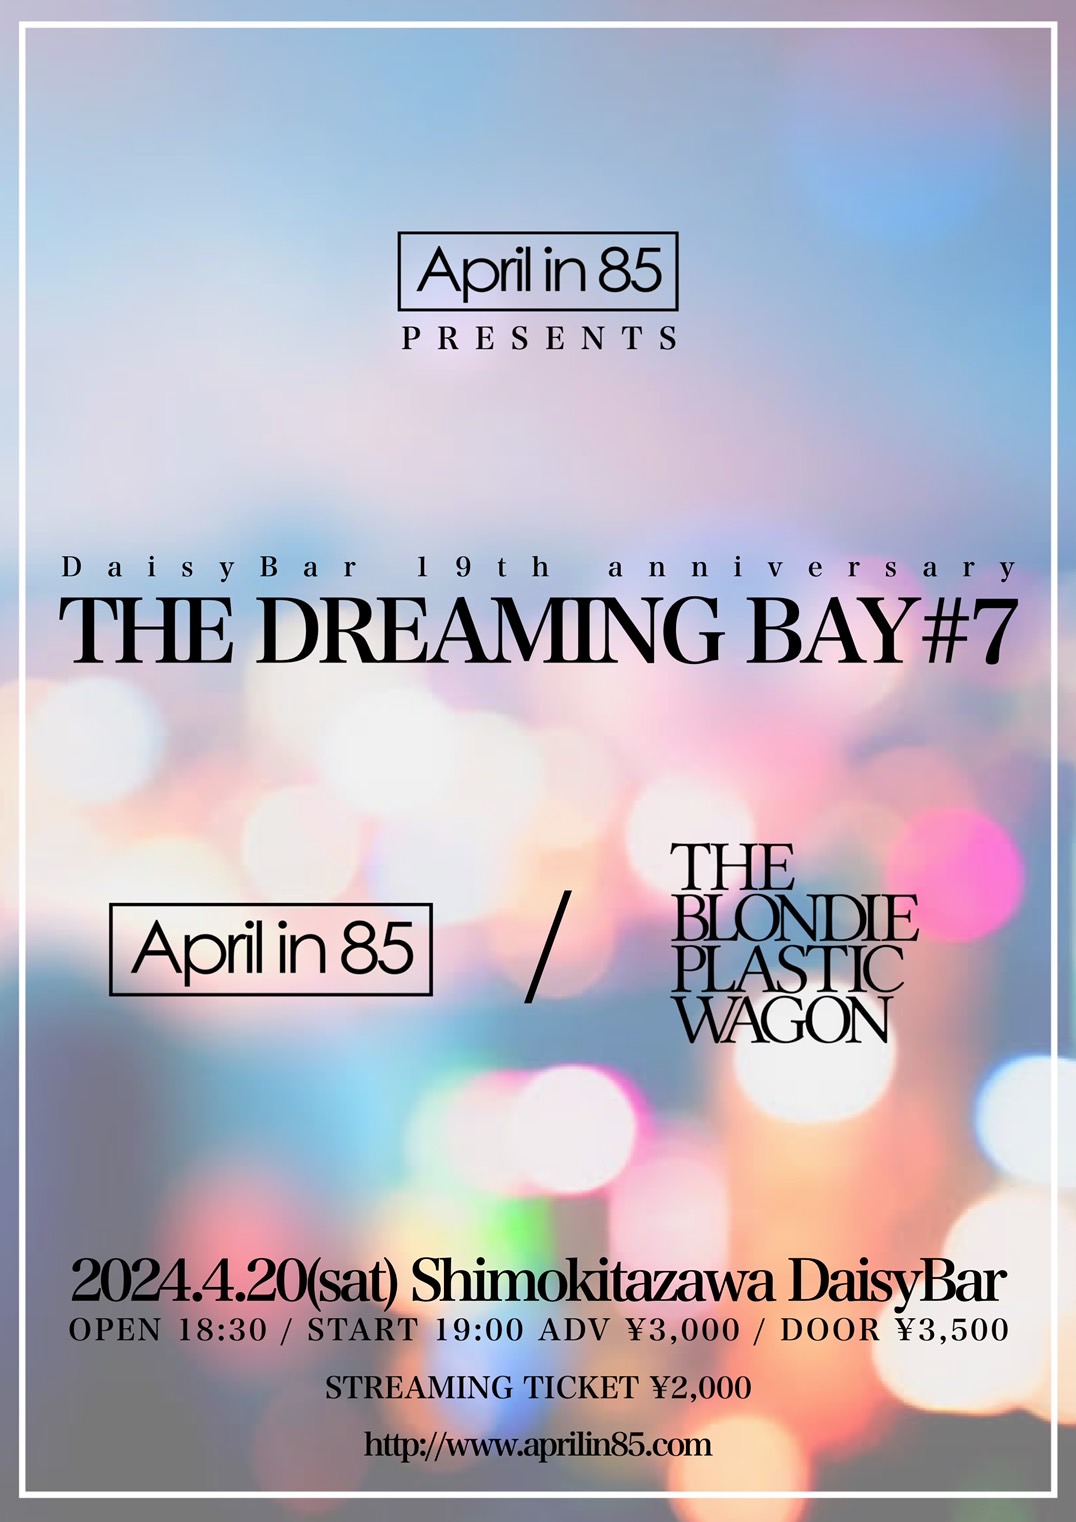 DaisyBar 19th Anniversary April in 85 presents〜THE DREAMING BAY#7〜